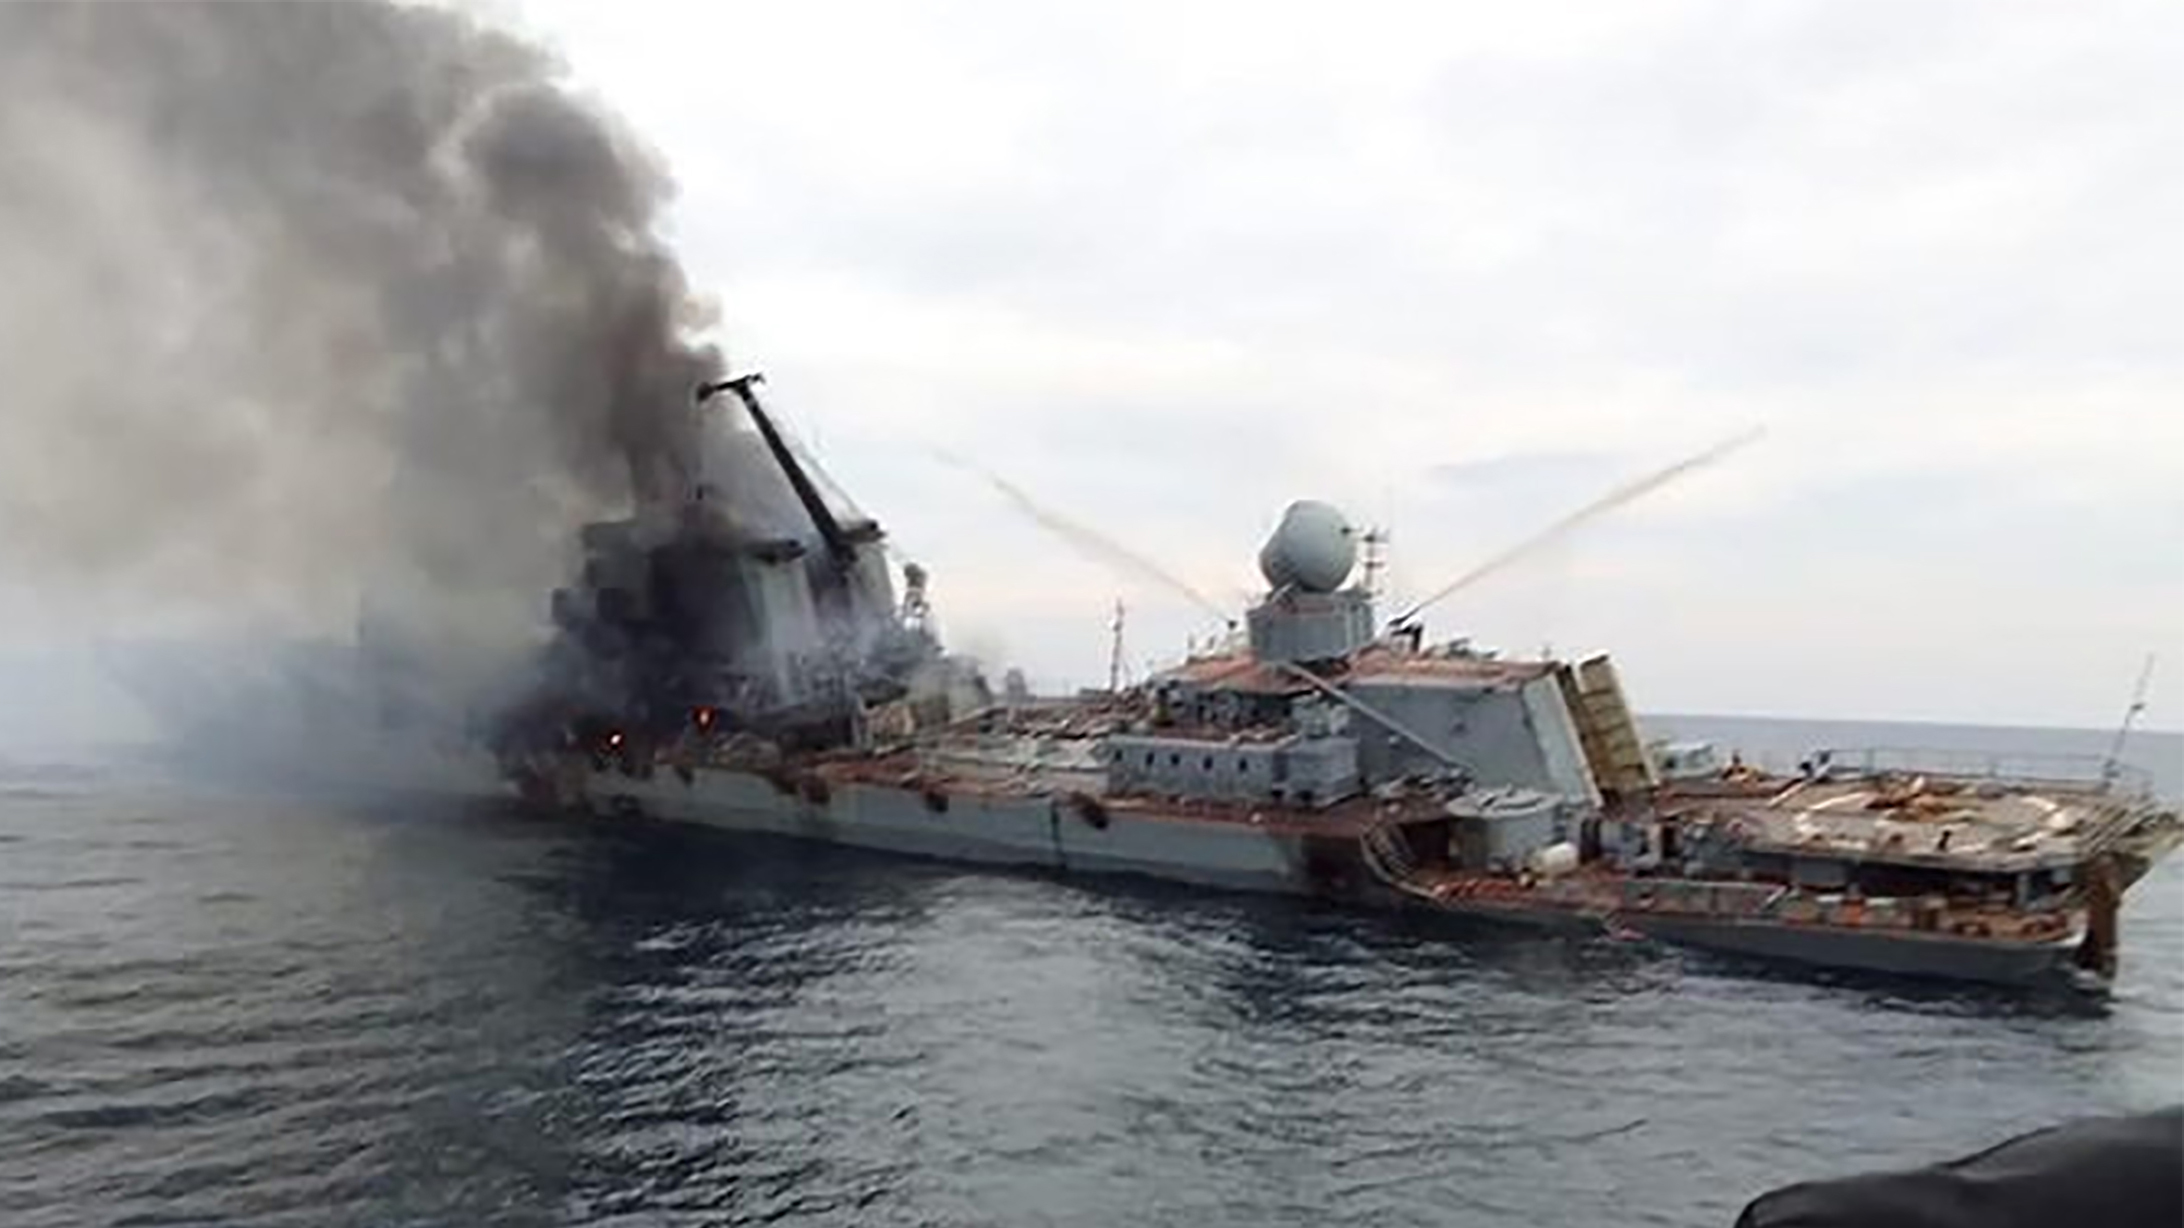 An image from social media released on April 18 shows a fire on the Russian warship Moskva.